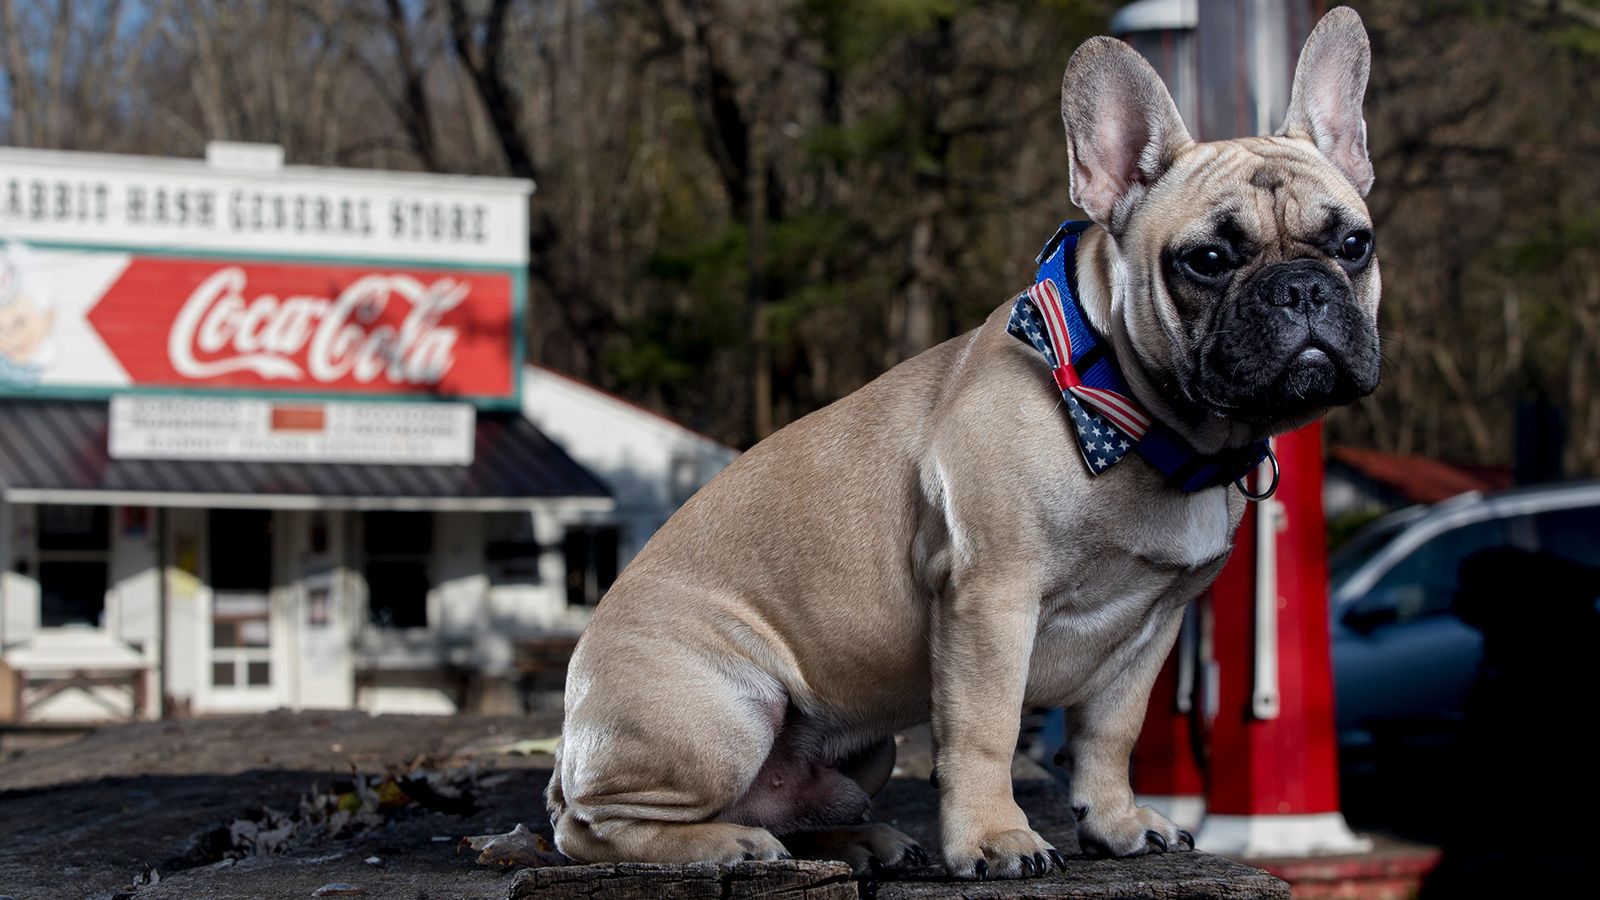 Animal royalty reaches a new level with elected dog mayors in some small US towns including Wilbur, a French bulldog, posing here for a portrait in November 2020. He's the latest mayoral dog in Rabbit Hash, Kentucky -- which has been electing canines since <a href="index.php?page=&url=https%3A%2F%2Fwww.cincinnati.com%2Fstory%2Fnews%2F2021%2F01%2F01%2Frabbit-hash-dog-mayor-wilbur-french-bulldog%2F6161577002%2F" target="_blank" target="_blank">1998</a>.